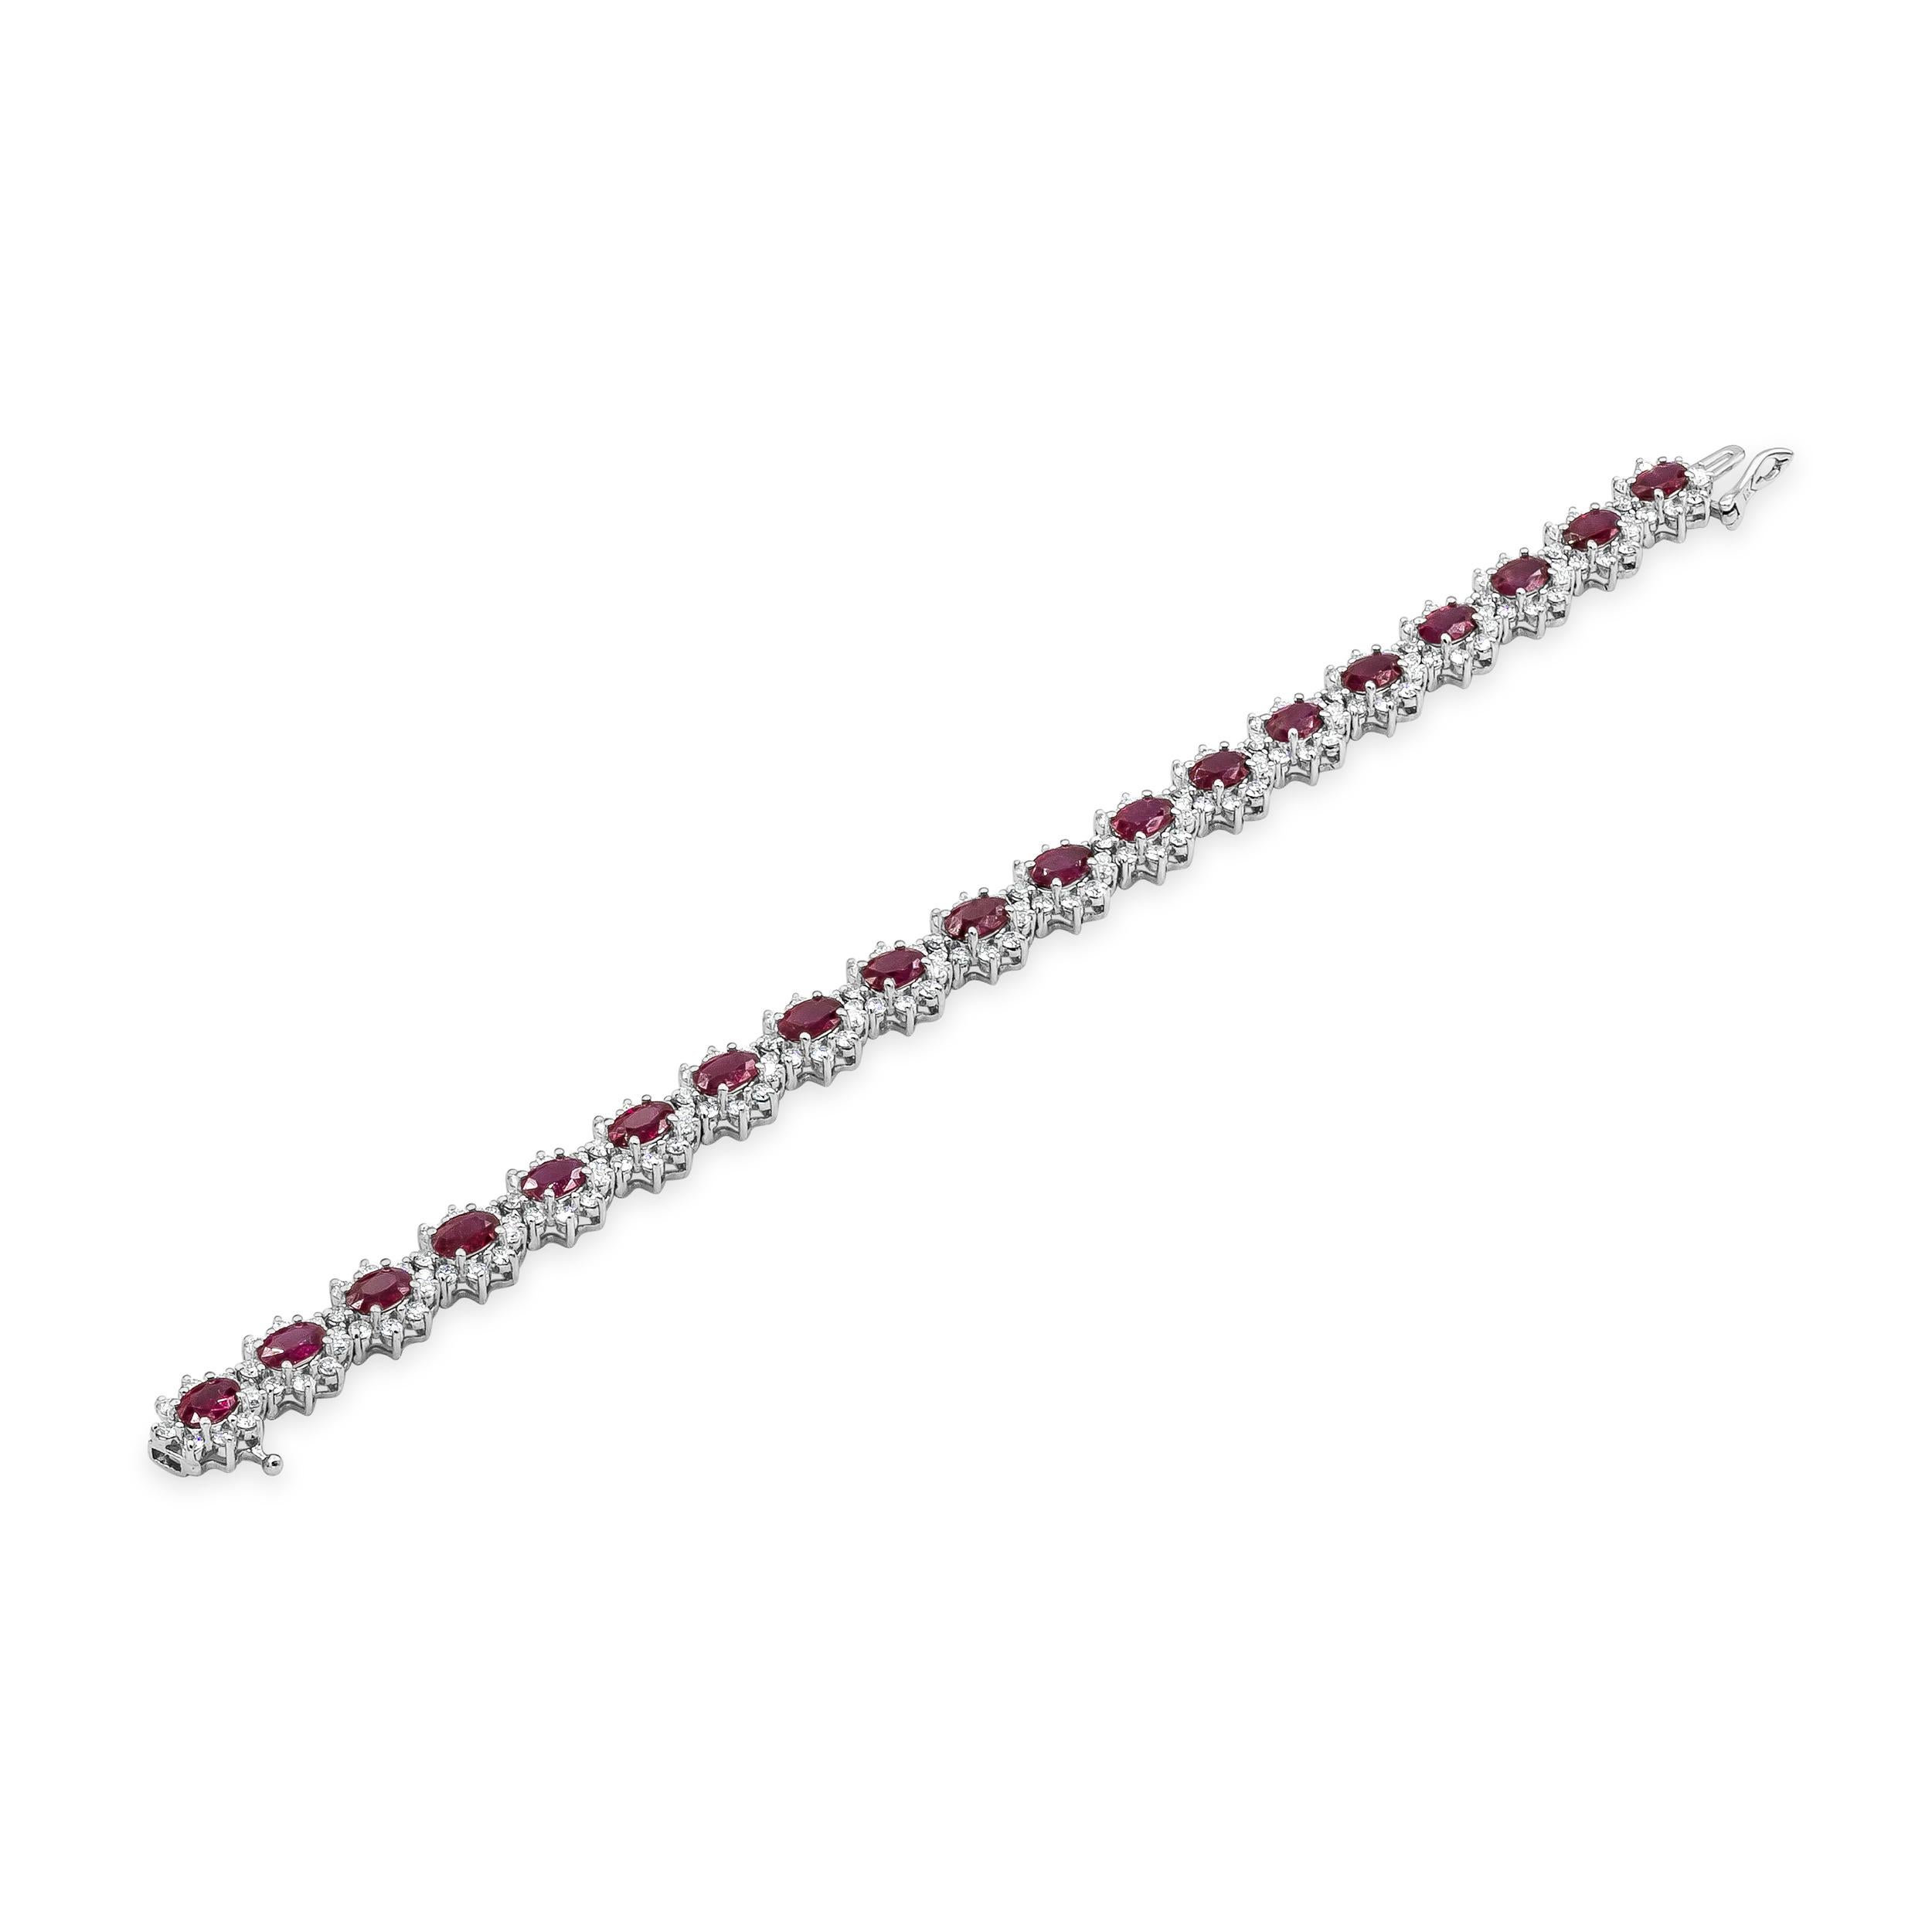 A brilliant tennis bracelet showcasing oval cut rubies weighing 10.15 carats total, surrounded with round diamond weighing 5.01 carats total. Set in a Flower-Motif design. Made with 18K White Gold. 7 inches in Length.

Roman Malakov is a custom